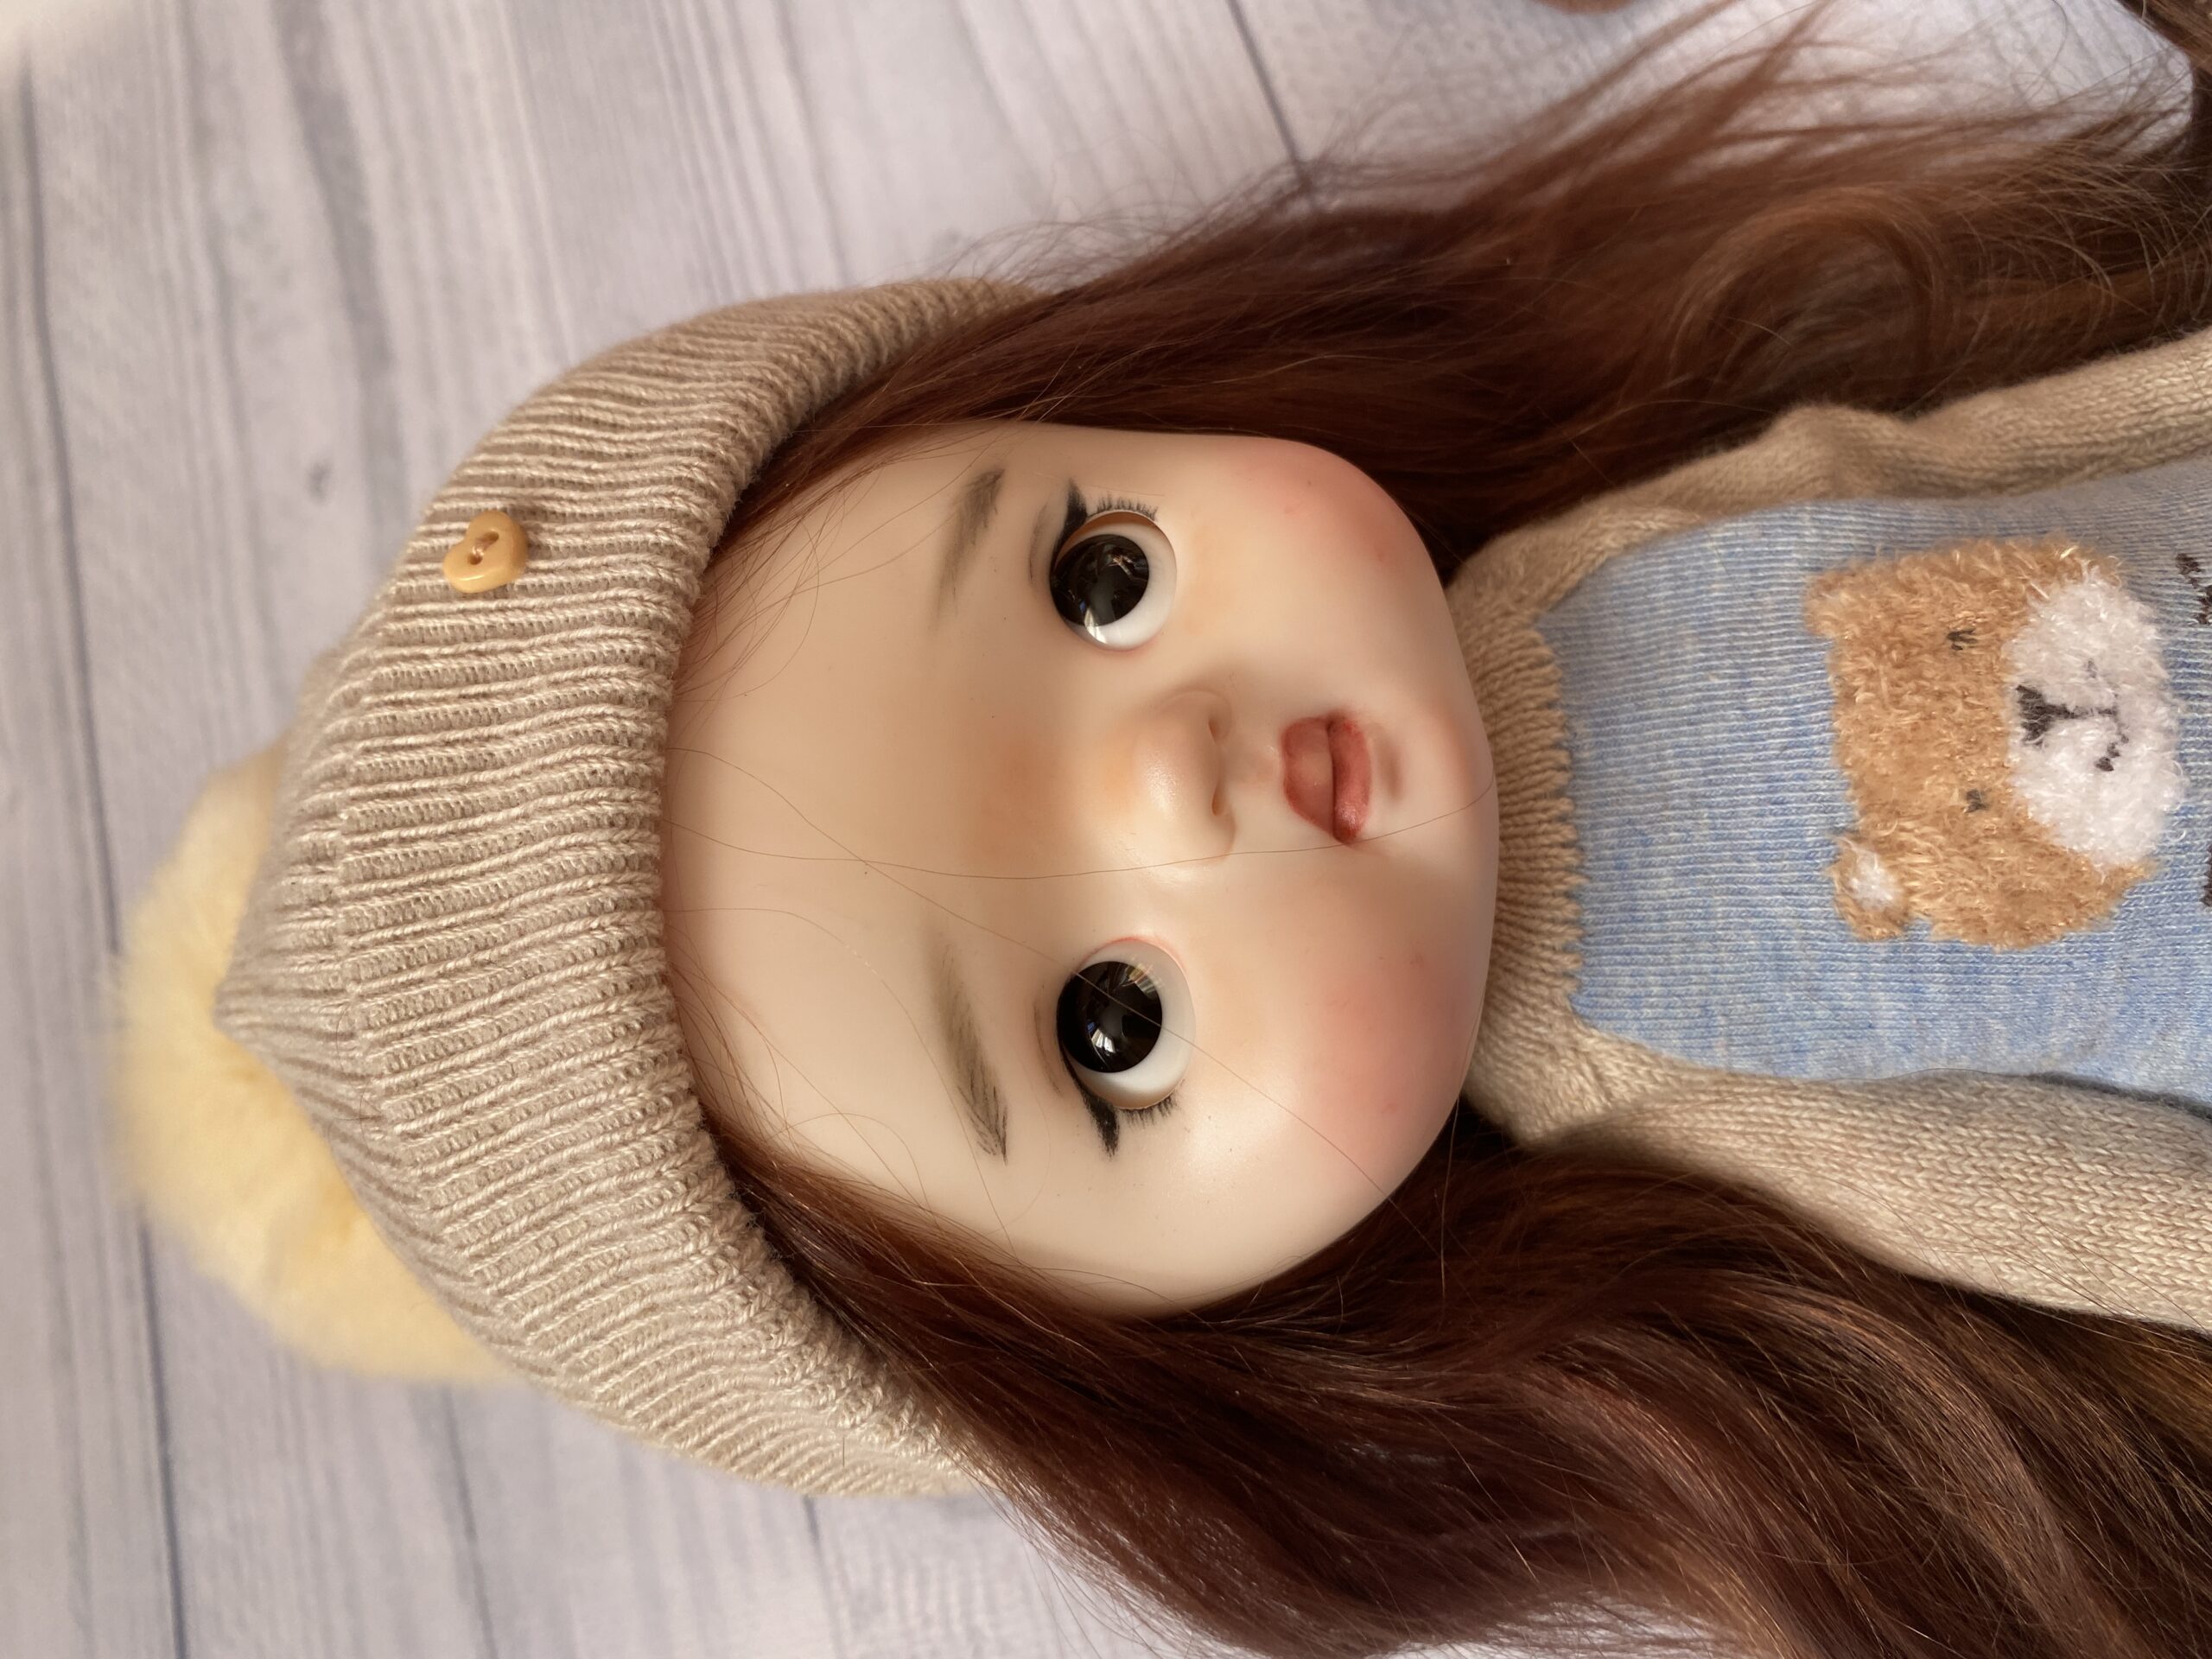 QBABY DOLLS by RODGERDOLL: VELCRO HATS & ACCESSORIES